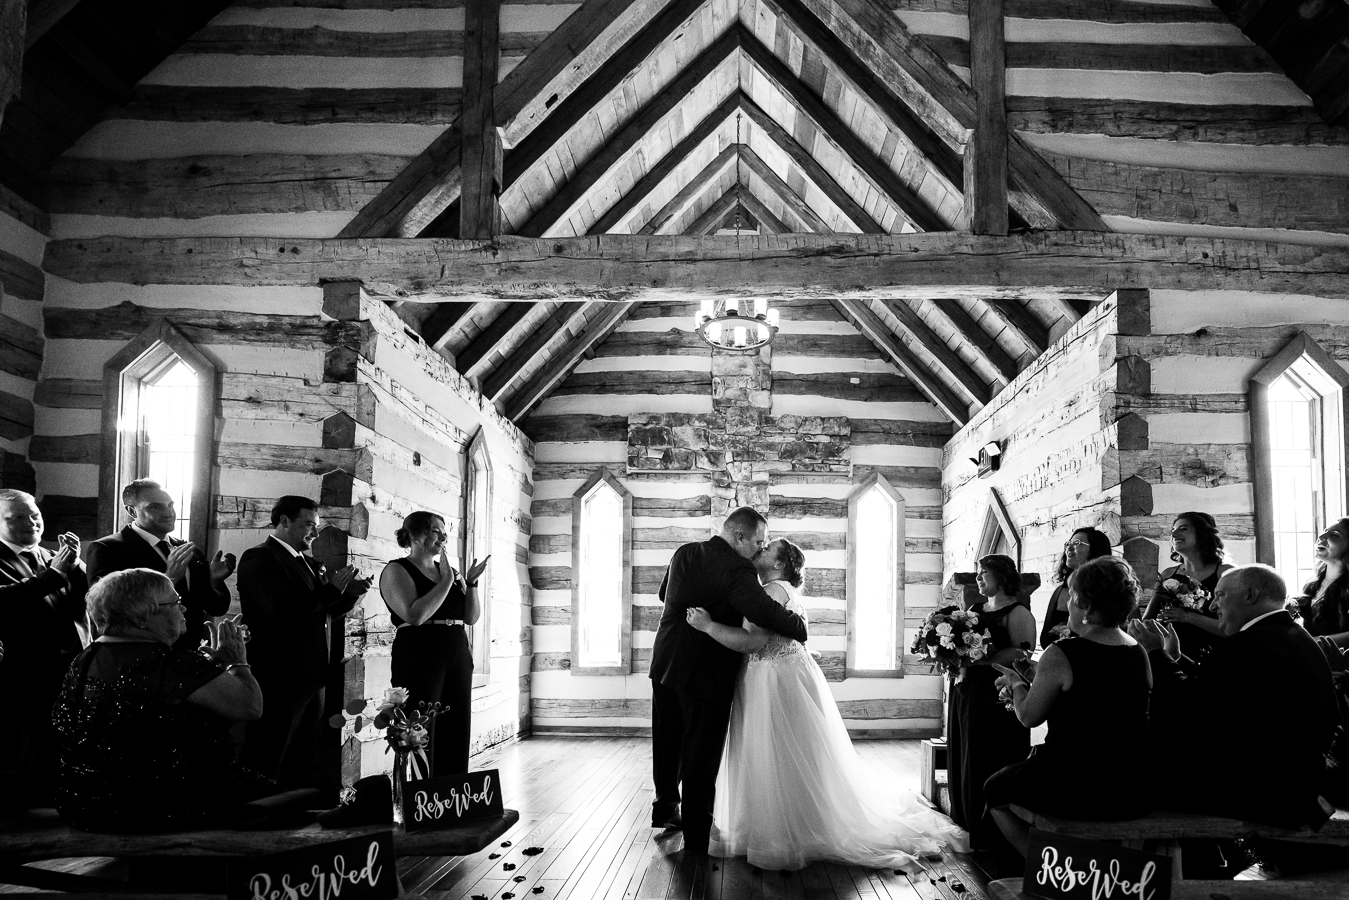 Oak Lodge Wedding Photographer, rhinehart photography, captures this black and white image of the bride and groom as they share their first kiss as husband and wife inside of this cozy log chapel surrounded by family and friends during their wedding ceremony in stahlstown pa at oak lodge